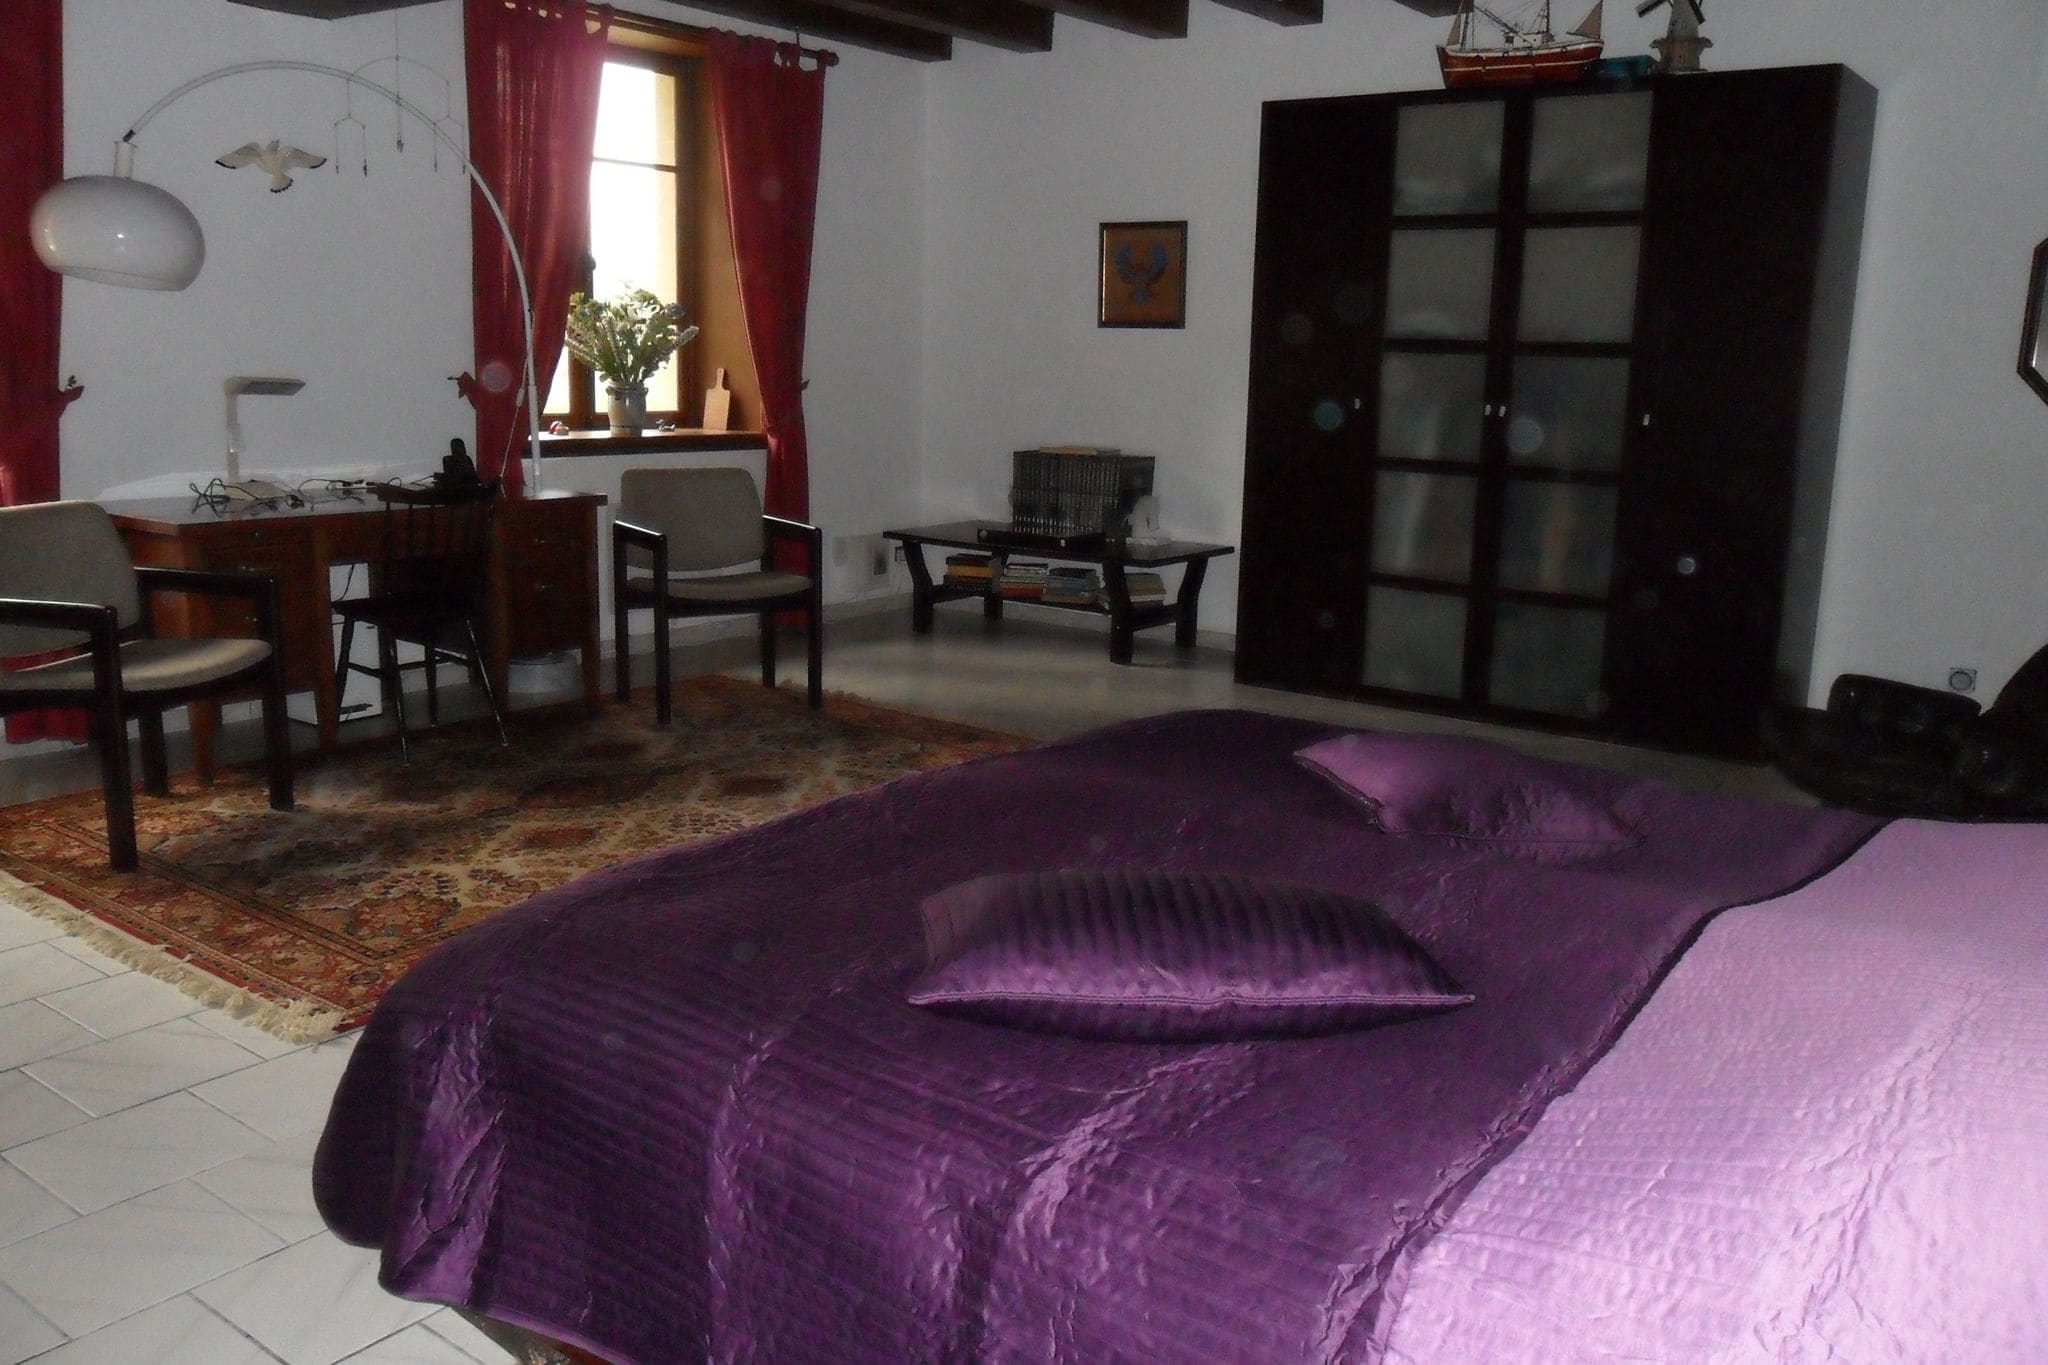 Attractive holiday home in Auvergne.